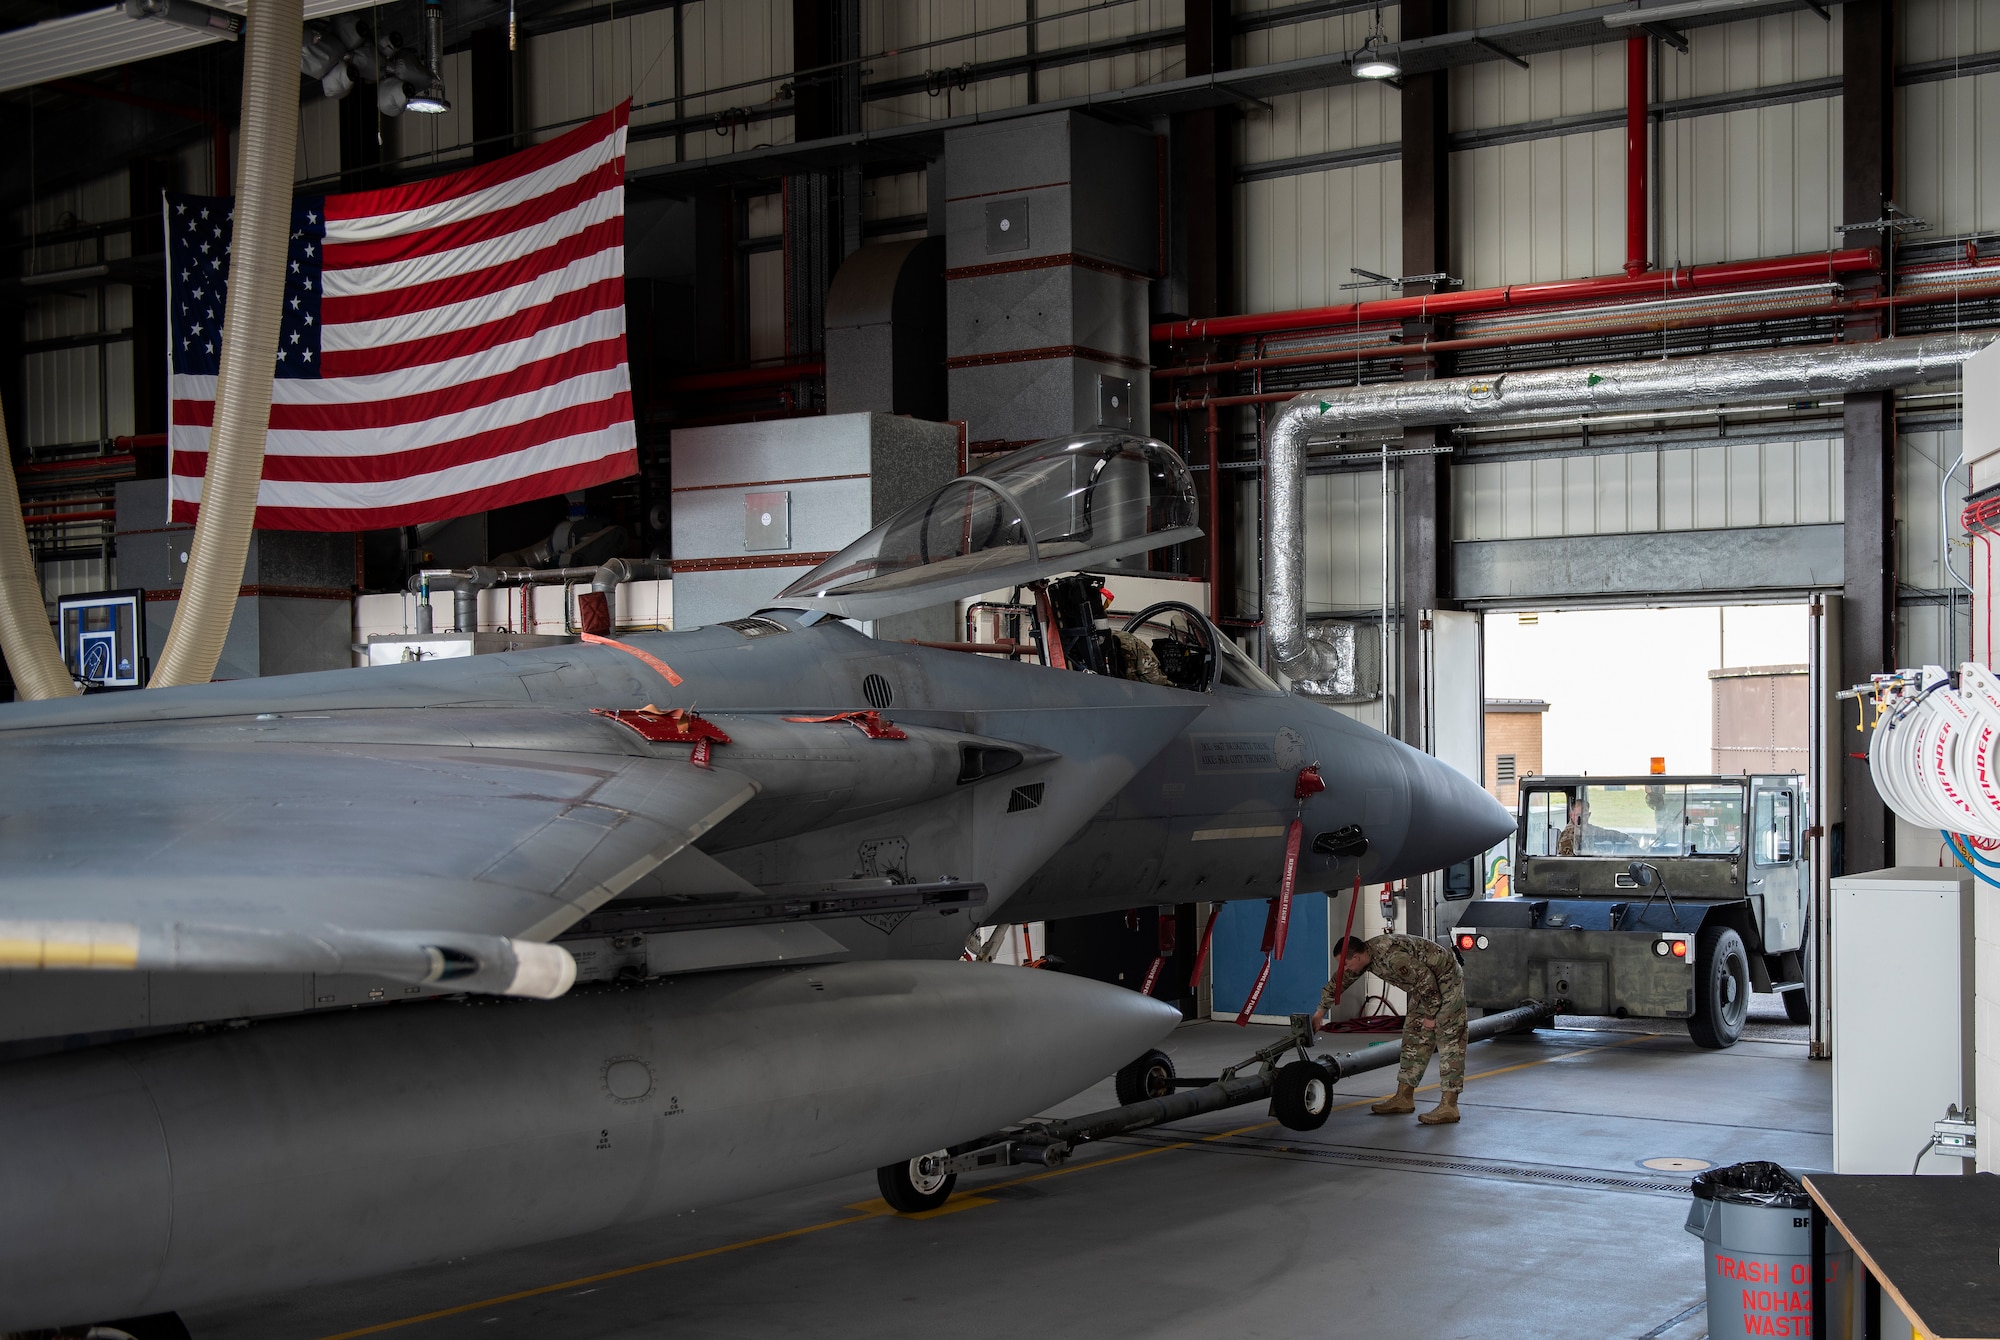 U.S. Air Force Airmen, assigned to the 48th Component Maintenance Squadron fuels shop, tow an F-15C Eagle into the hangar during an Agile Combat Employment training at Royal Air Force Lakenheath, England, Aug. 31, 2020. The training was designed to enhance ACE  capabilities by teaching Airmen to perform multiple roles outside the scope of their regular daily duties. (U.S. Air Force photo by Airman 1st Class Jessi Monte)